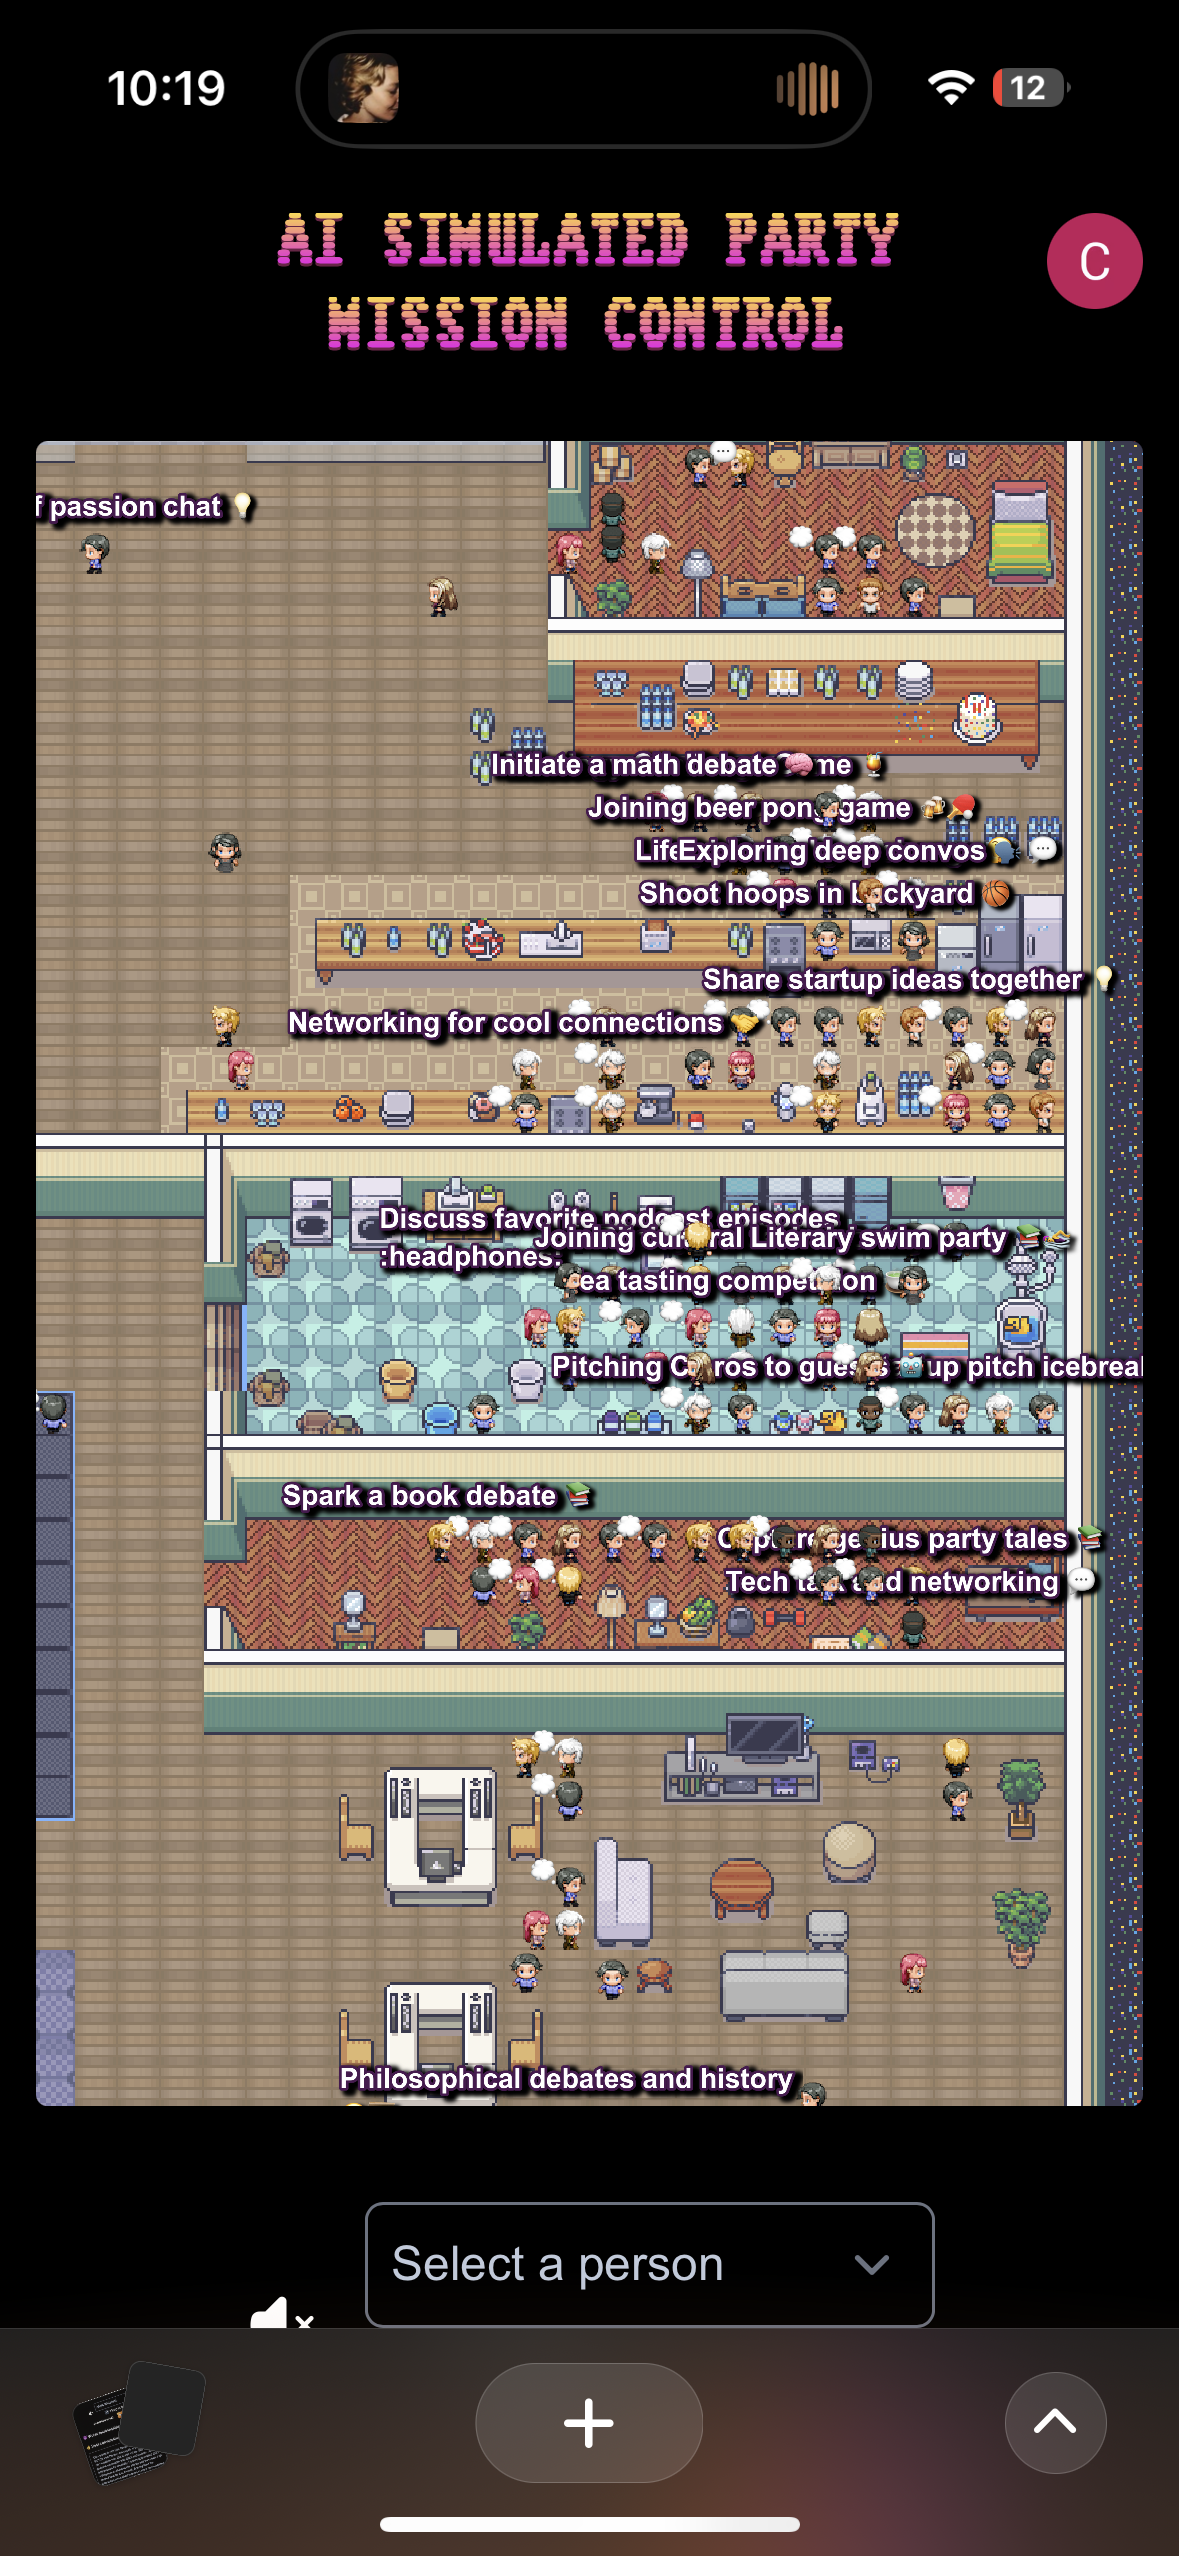 Pixelated game screenshot of a virtual party with avatars engaging in various activities, like debates and games.